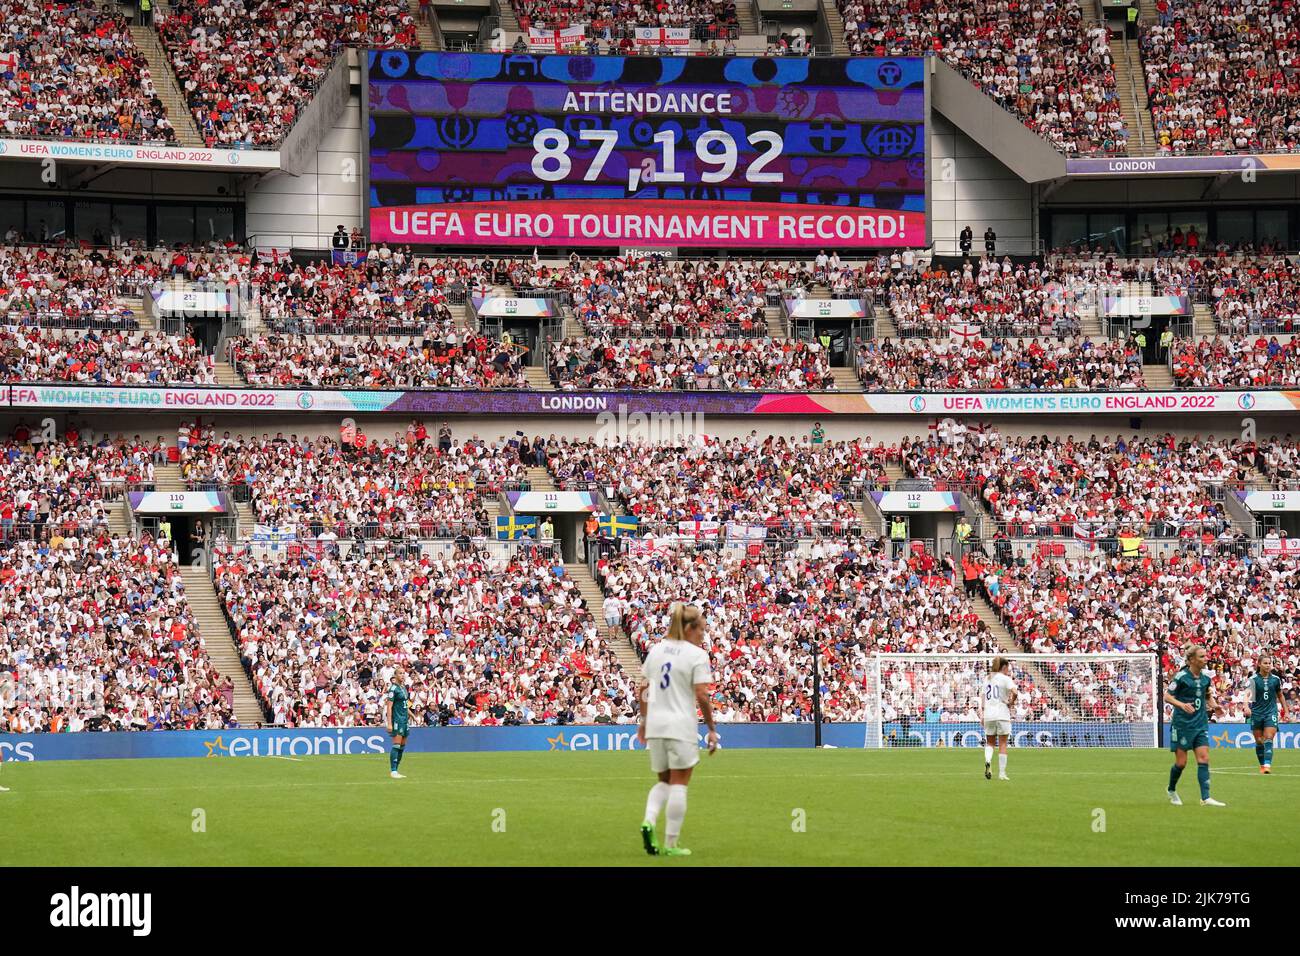 The big screen displays the record attendance for a UEFA Euro tournament during the UEFA Women's Euro 2022 final at Wembley Stadium, London. Picture date: Sunday July 31, 2022. Stock Photo